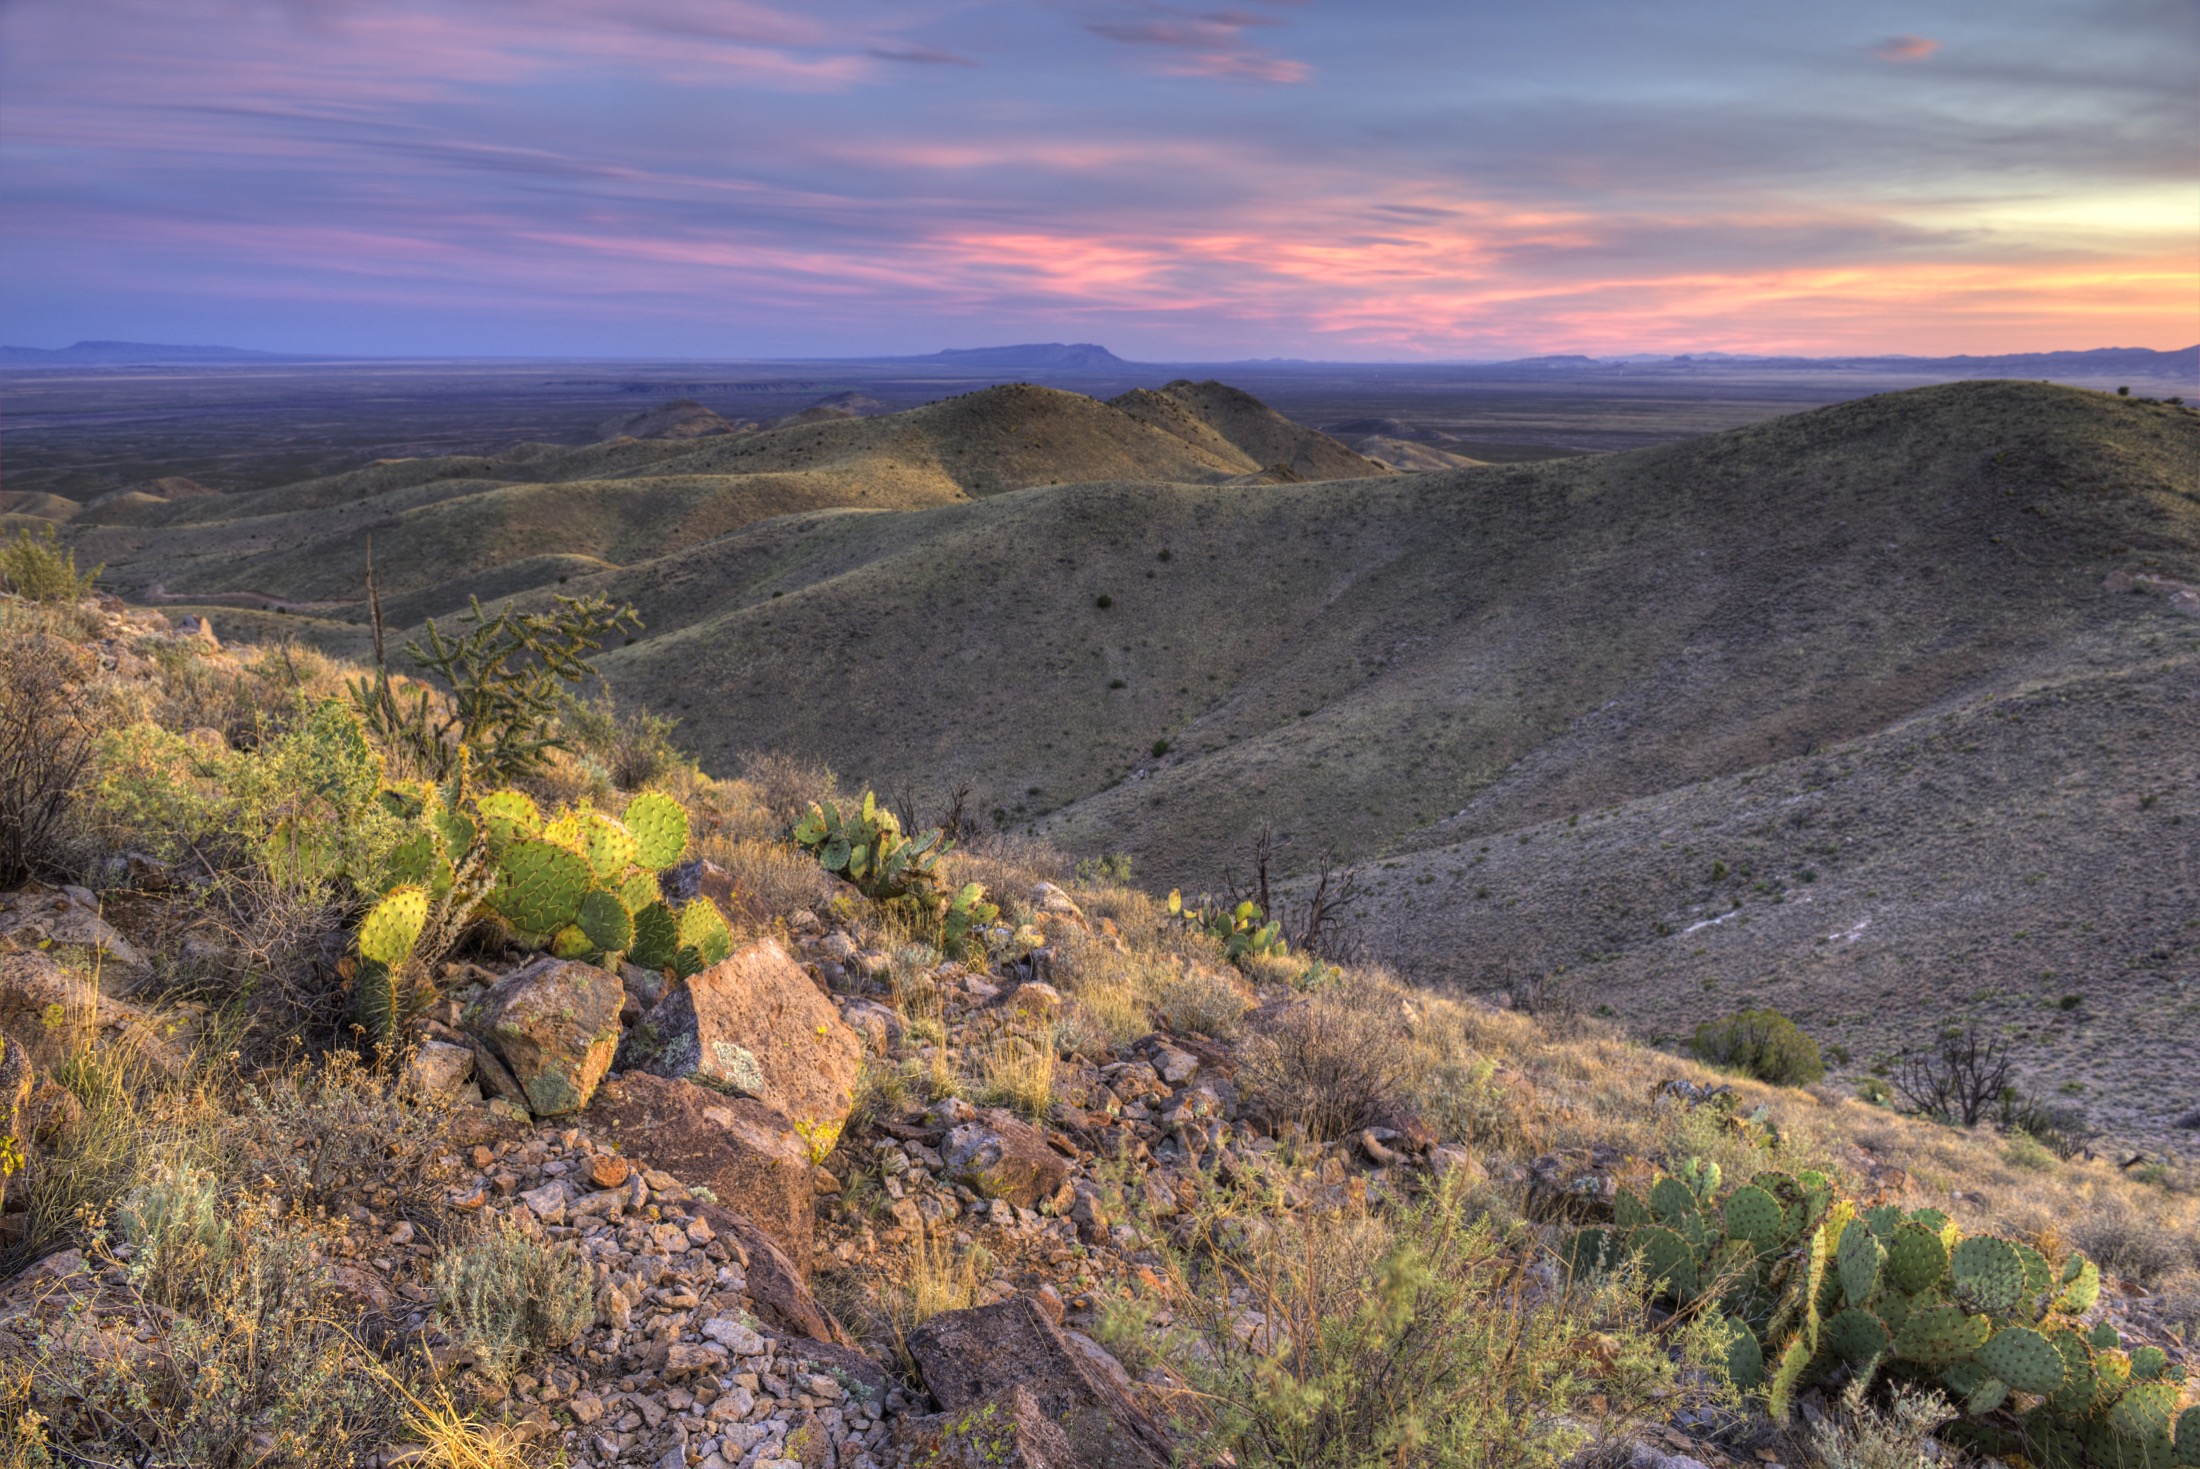 A colorful sunset over arid ranch land